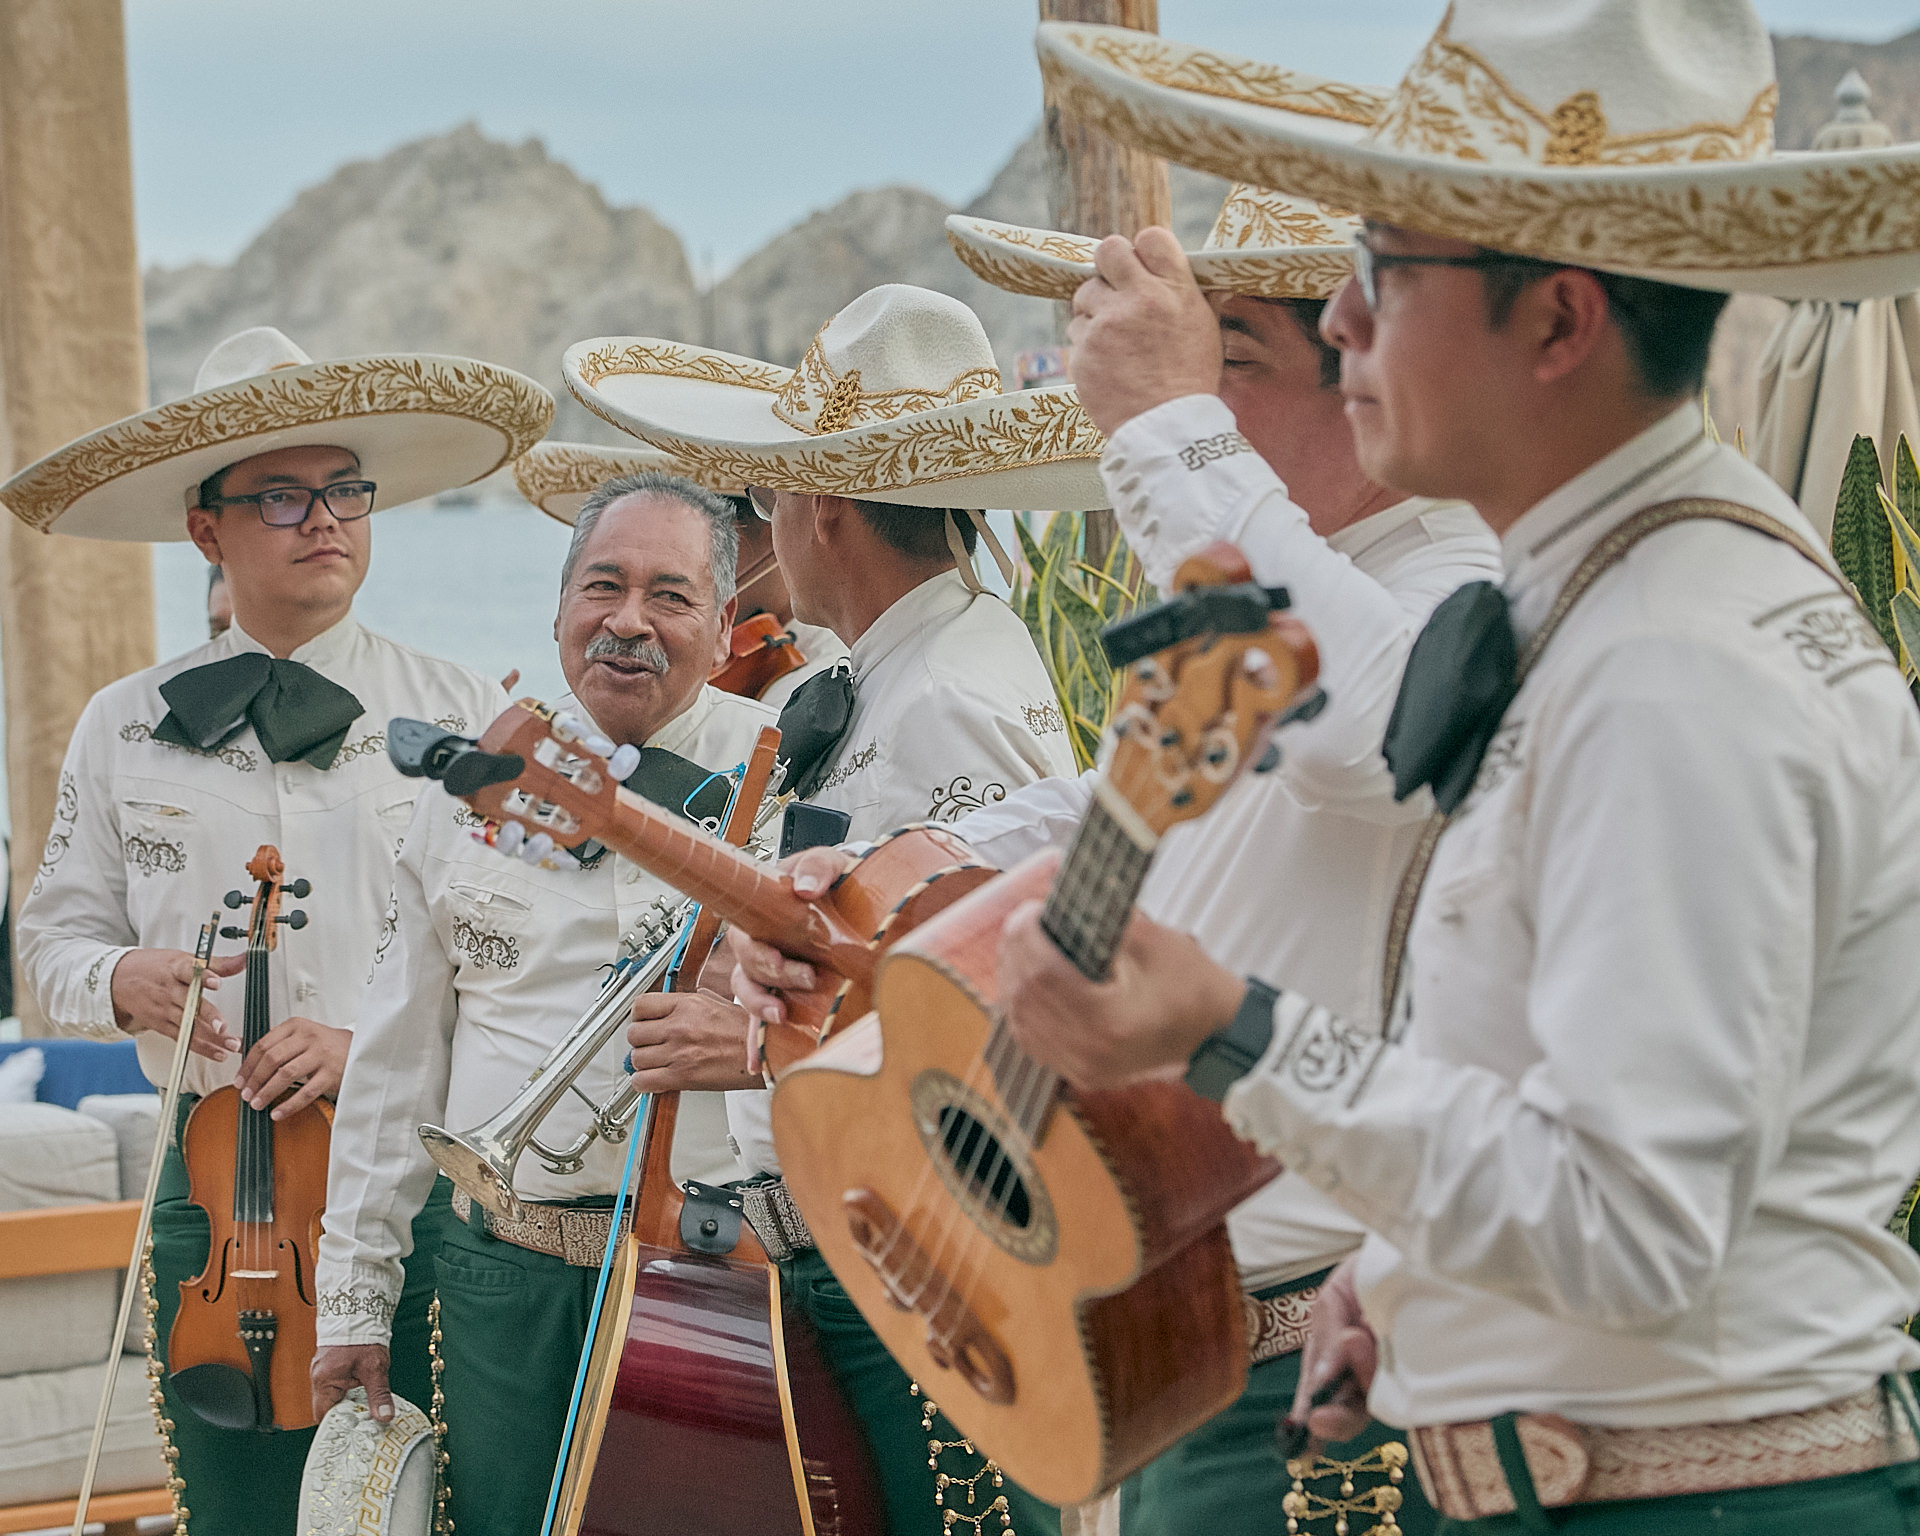 a group of men wearing sombreros and playing instruments.